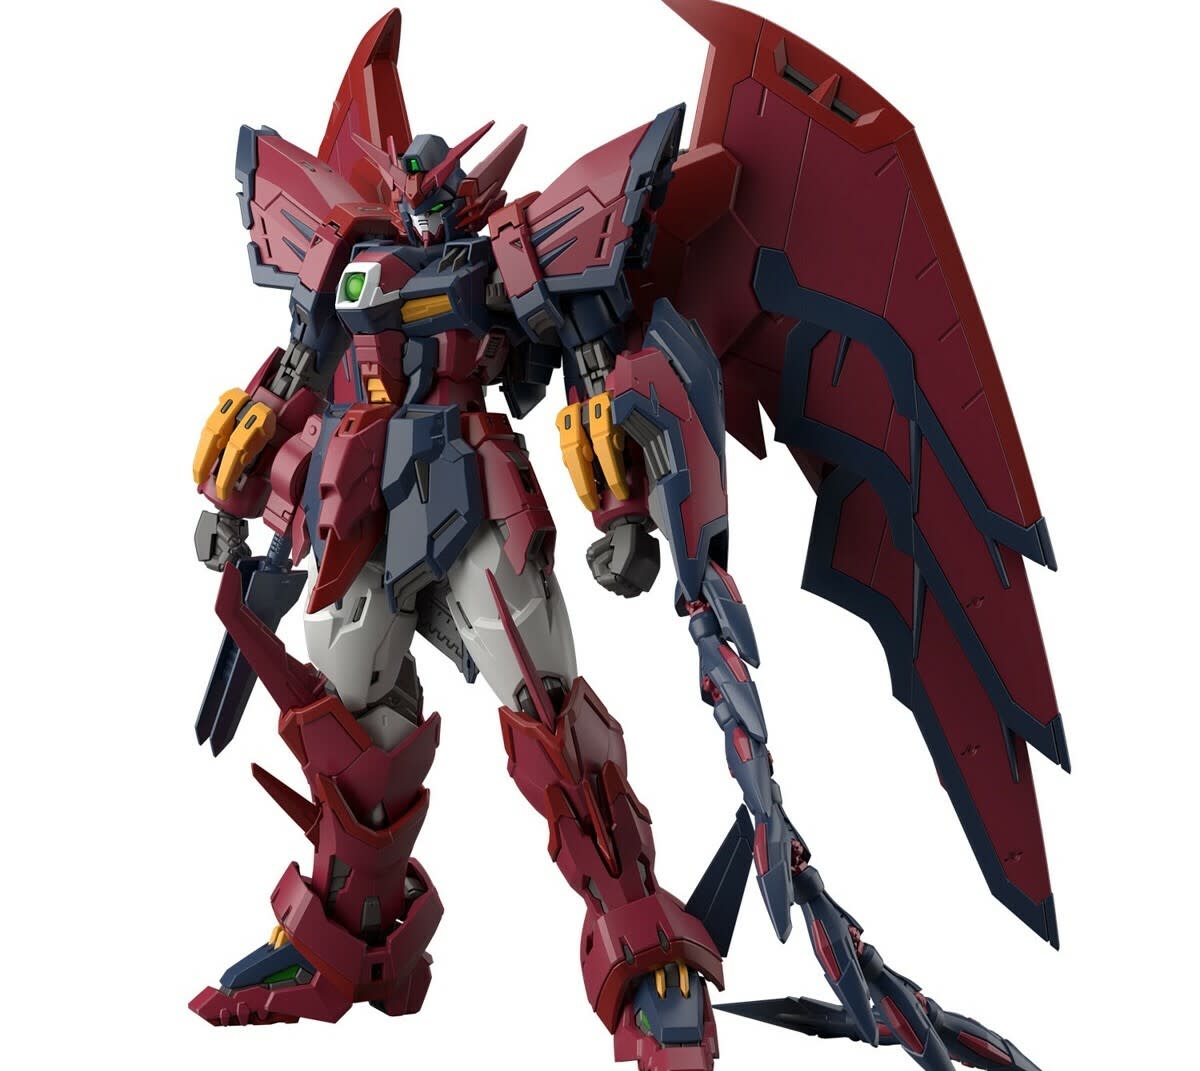 Why Are Fans So Hyped About Getting the Gundam Epyon RG Kit